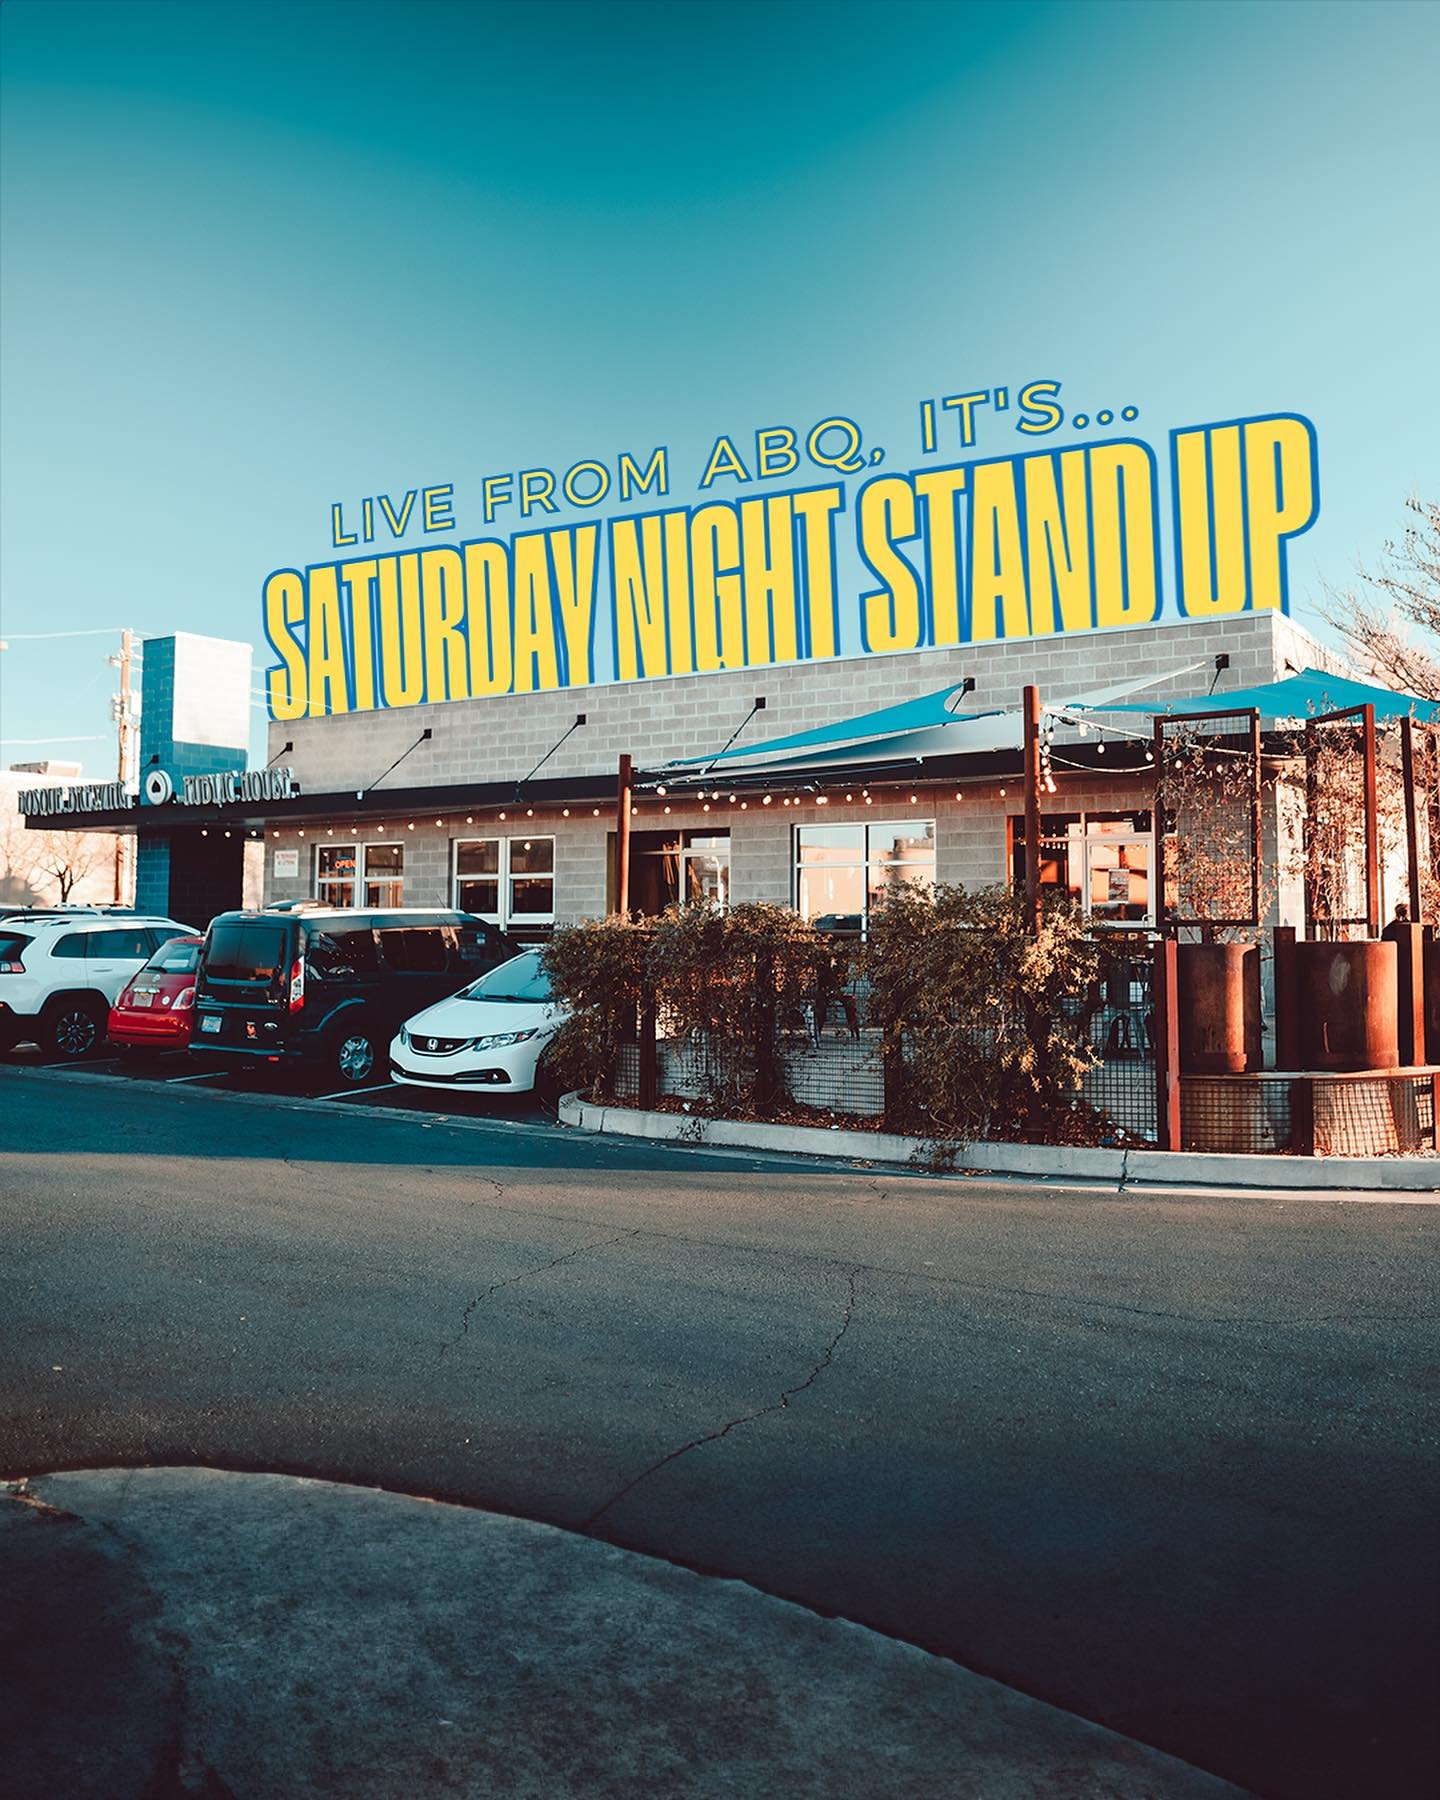 Live from ABQ, it&rsquo;s... Saturday Night Stand-Up! Hosted by @nax.comedy. 🎤😅🍻

📍TOMORROW, May 18th, at the Nob Hill Public House. Seating is at 7:30 pm, and the show starts at 8 pm. 

Featured Comedians
TRIPP @trippstelnicki
HOLLY @hollybyrdco